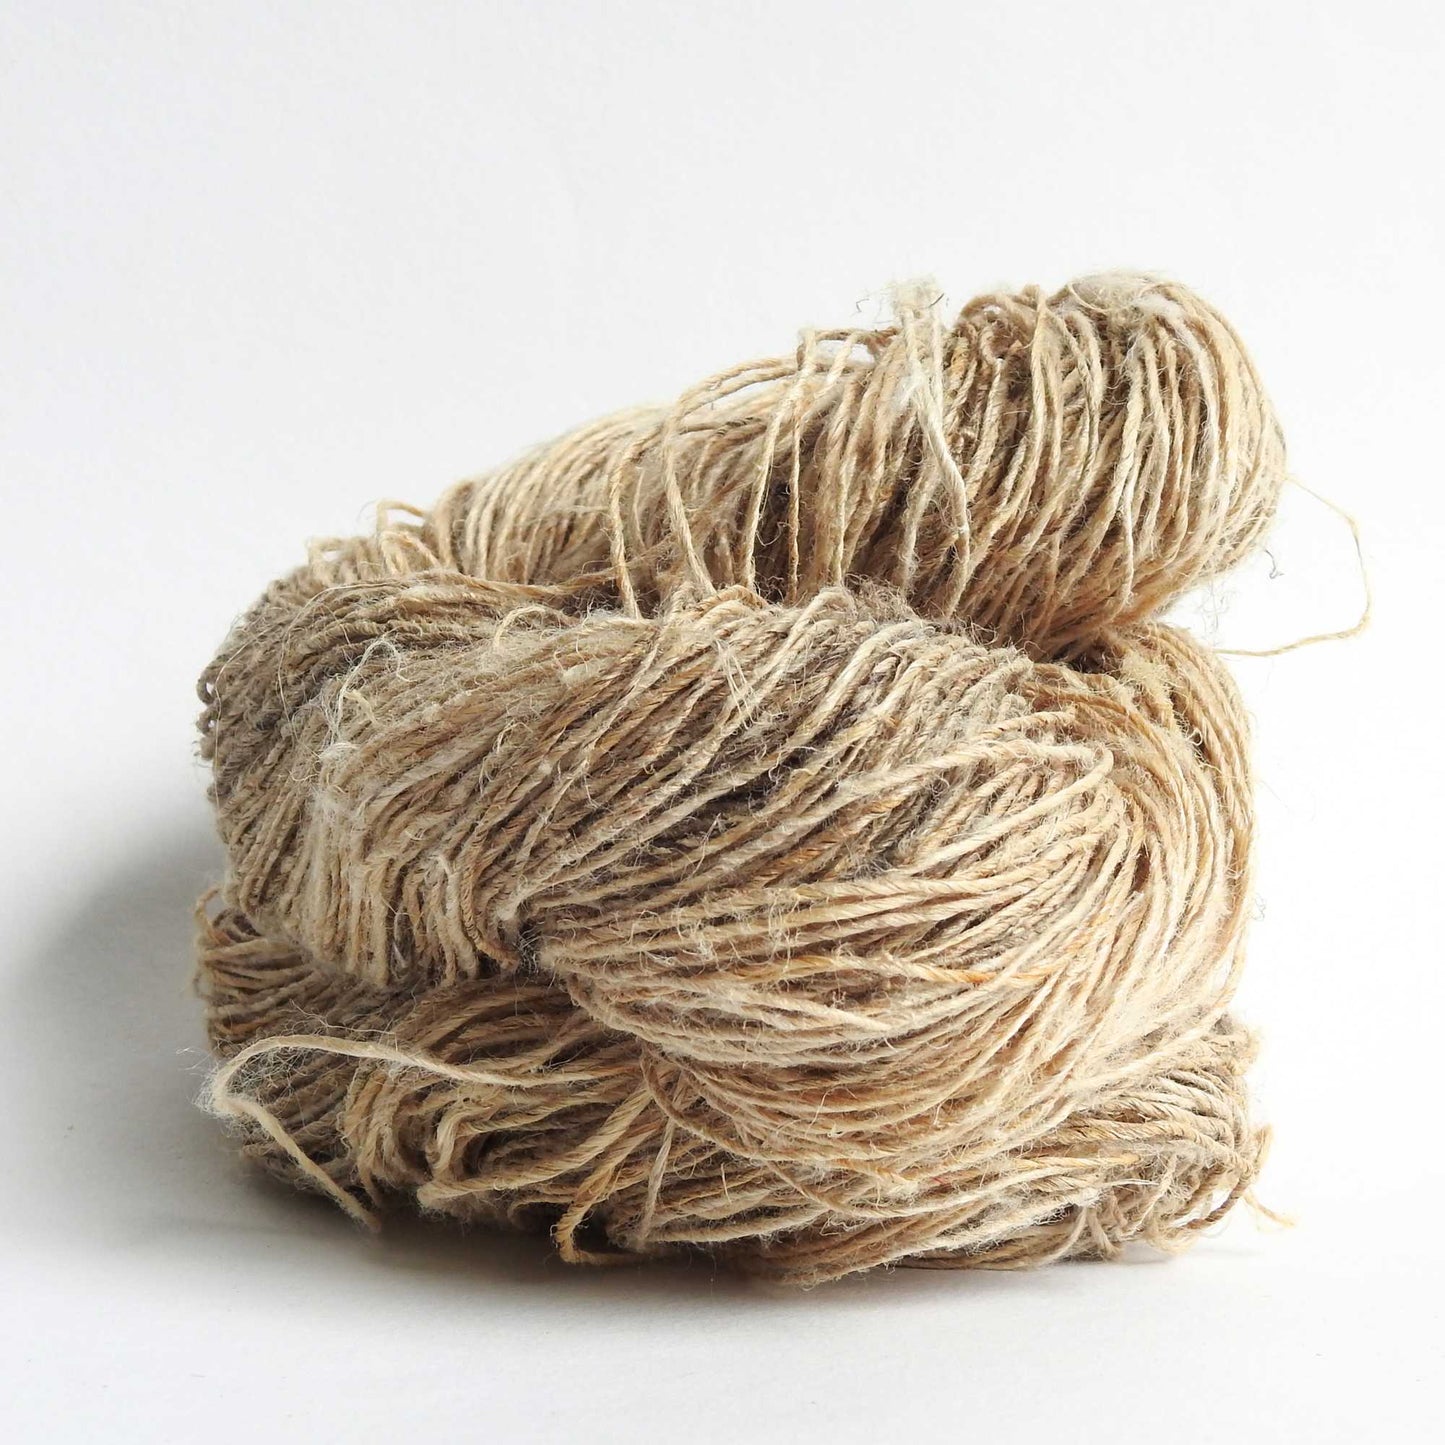 
                  
                    A skein of hand spun fine Hemp yarn in Natural.  Natural Hemp is a highly eco friendly fibre and sustainable crop. Knit, crochet or weave with natural Hemp yarn.
                  
                